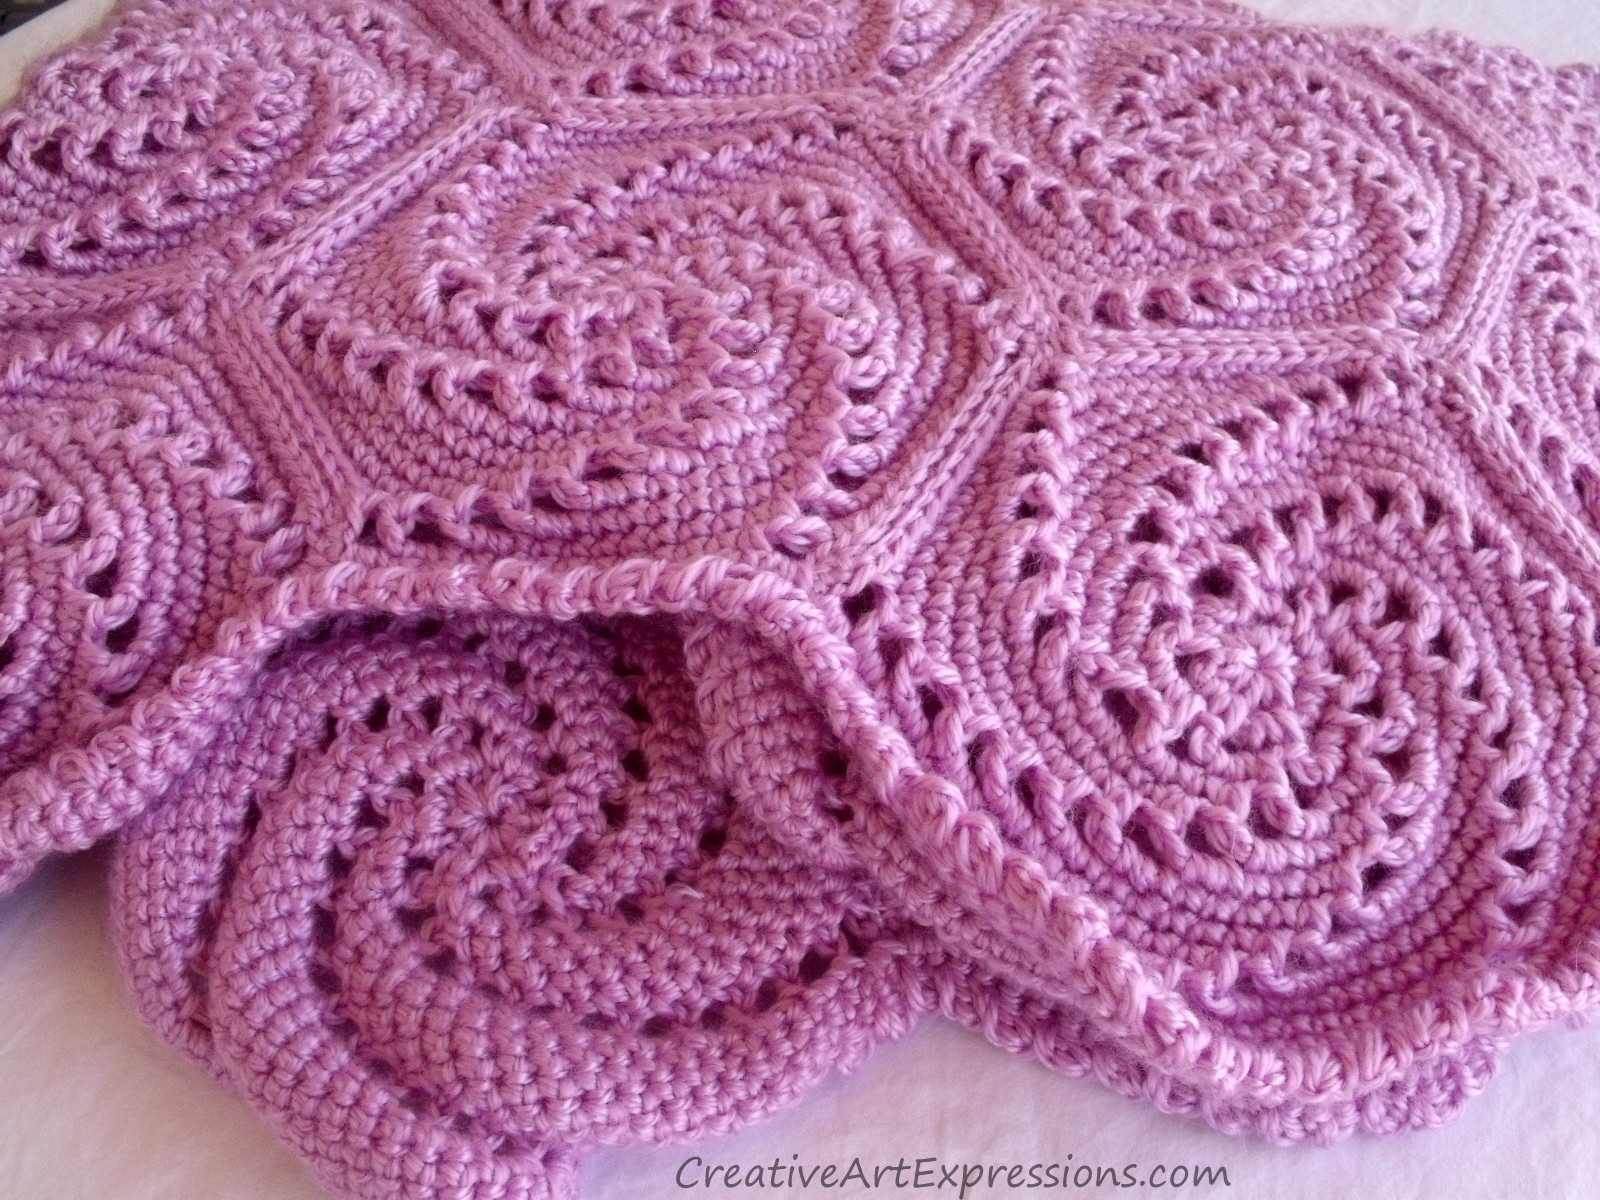 Creative Art Expressions Hand Crocheted Lilac Pinwheel Baby Blanket